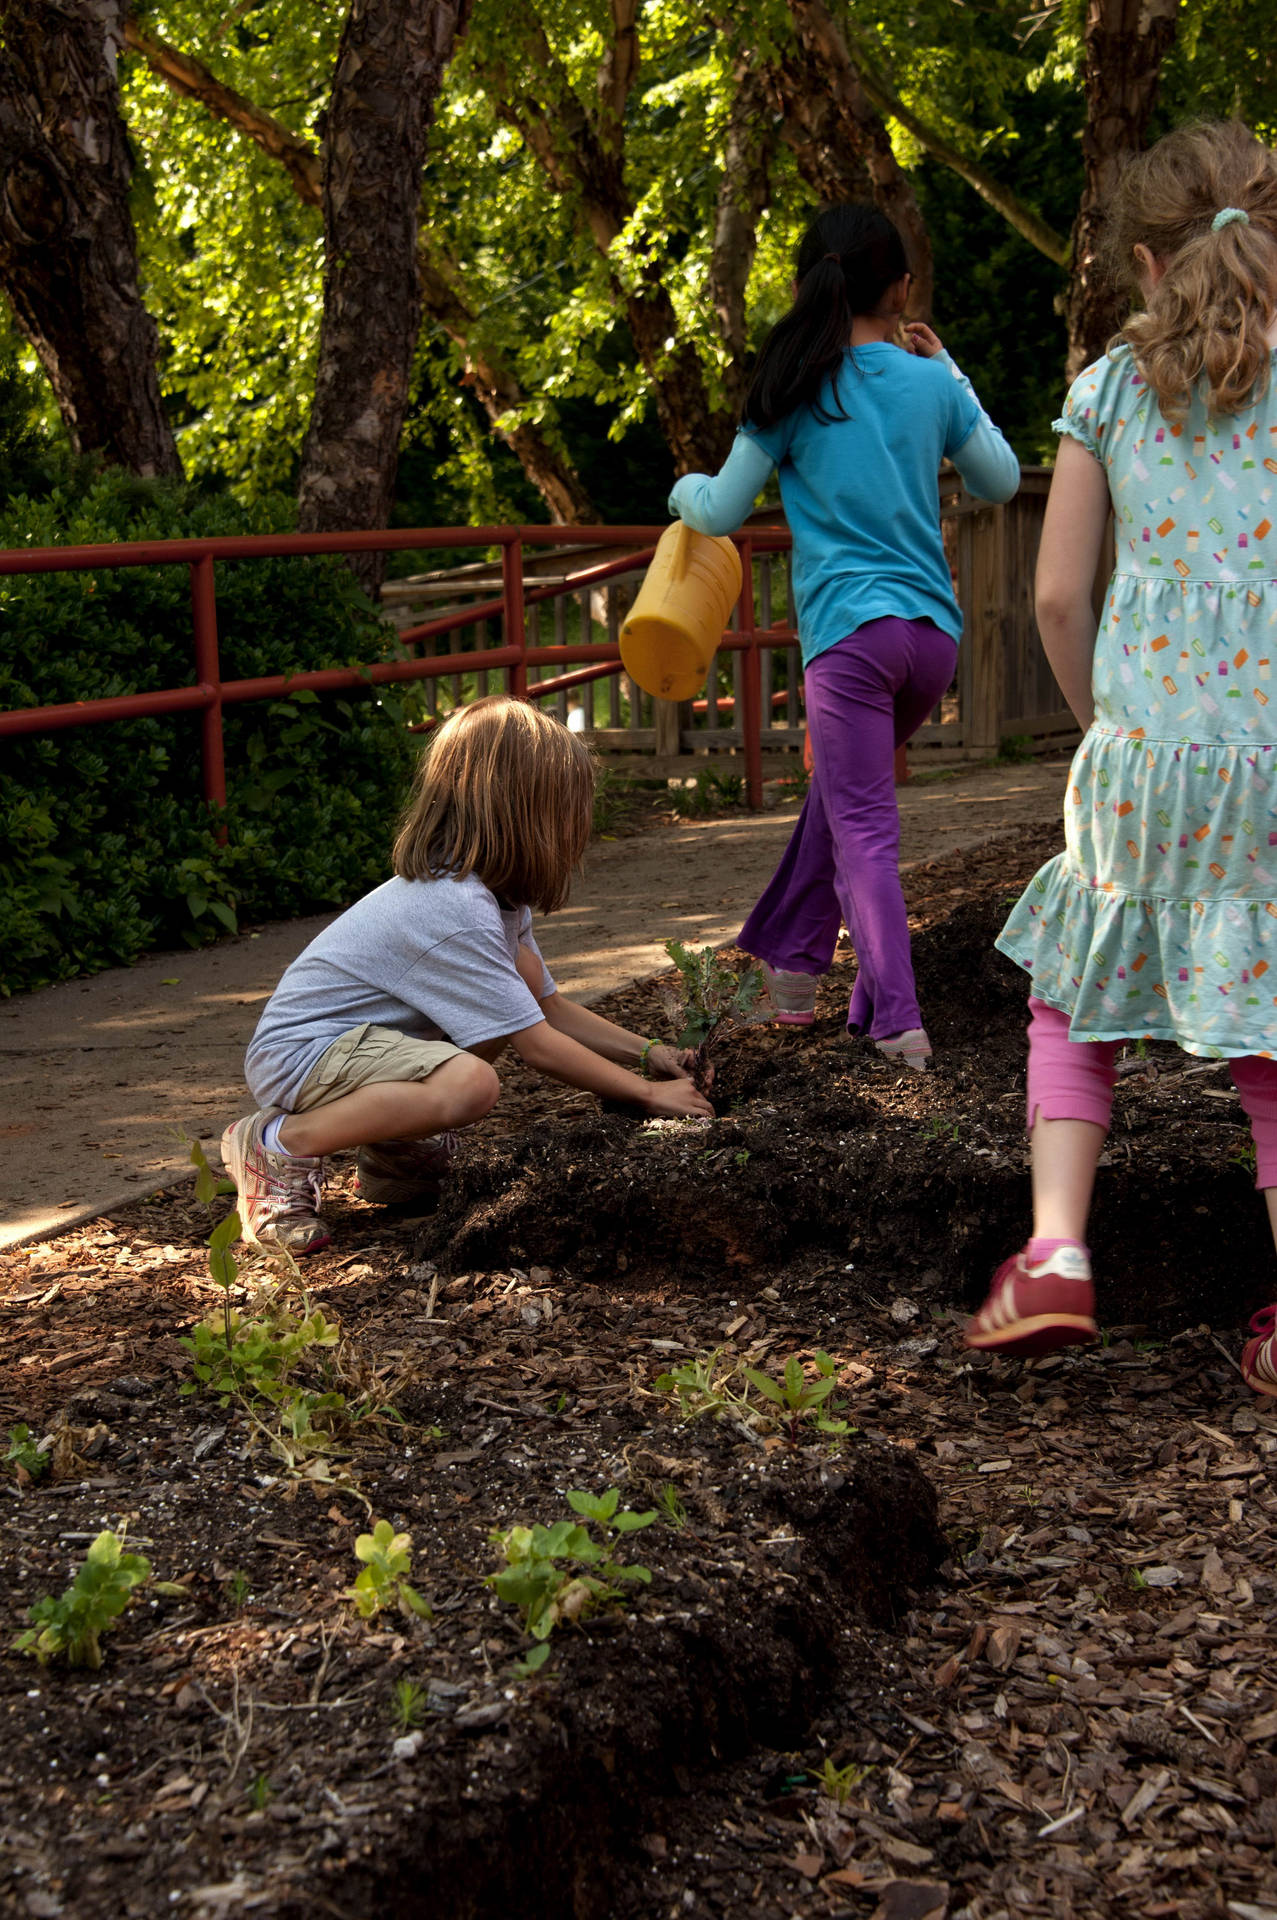 Young Kids enthusiastically participating in a gardening activity. Wallpaper